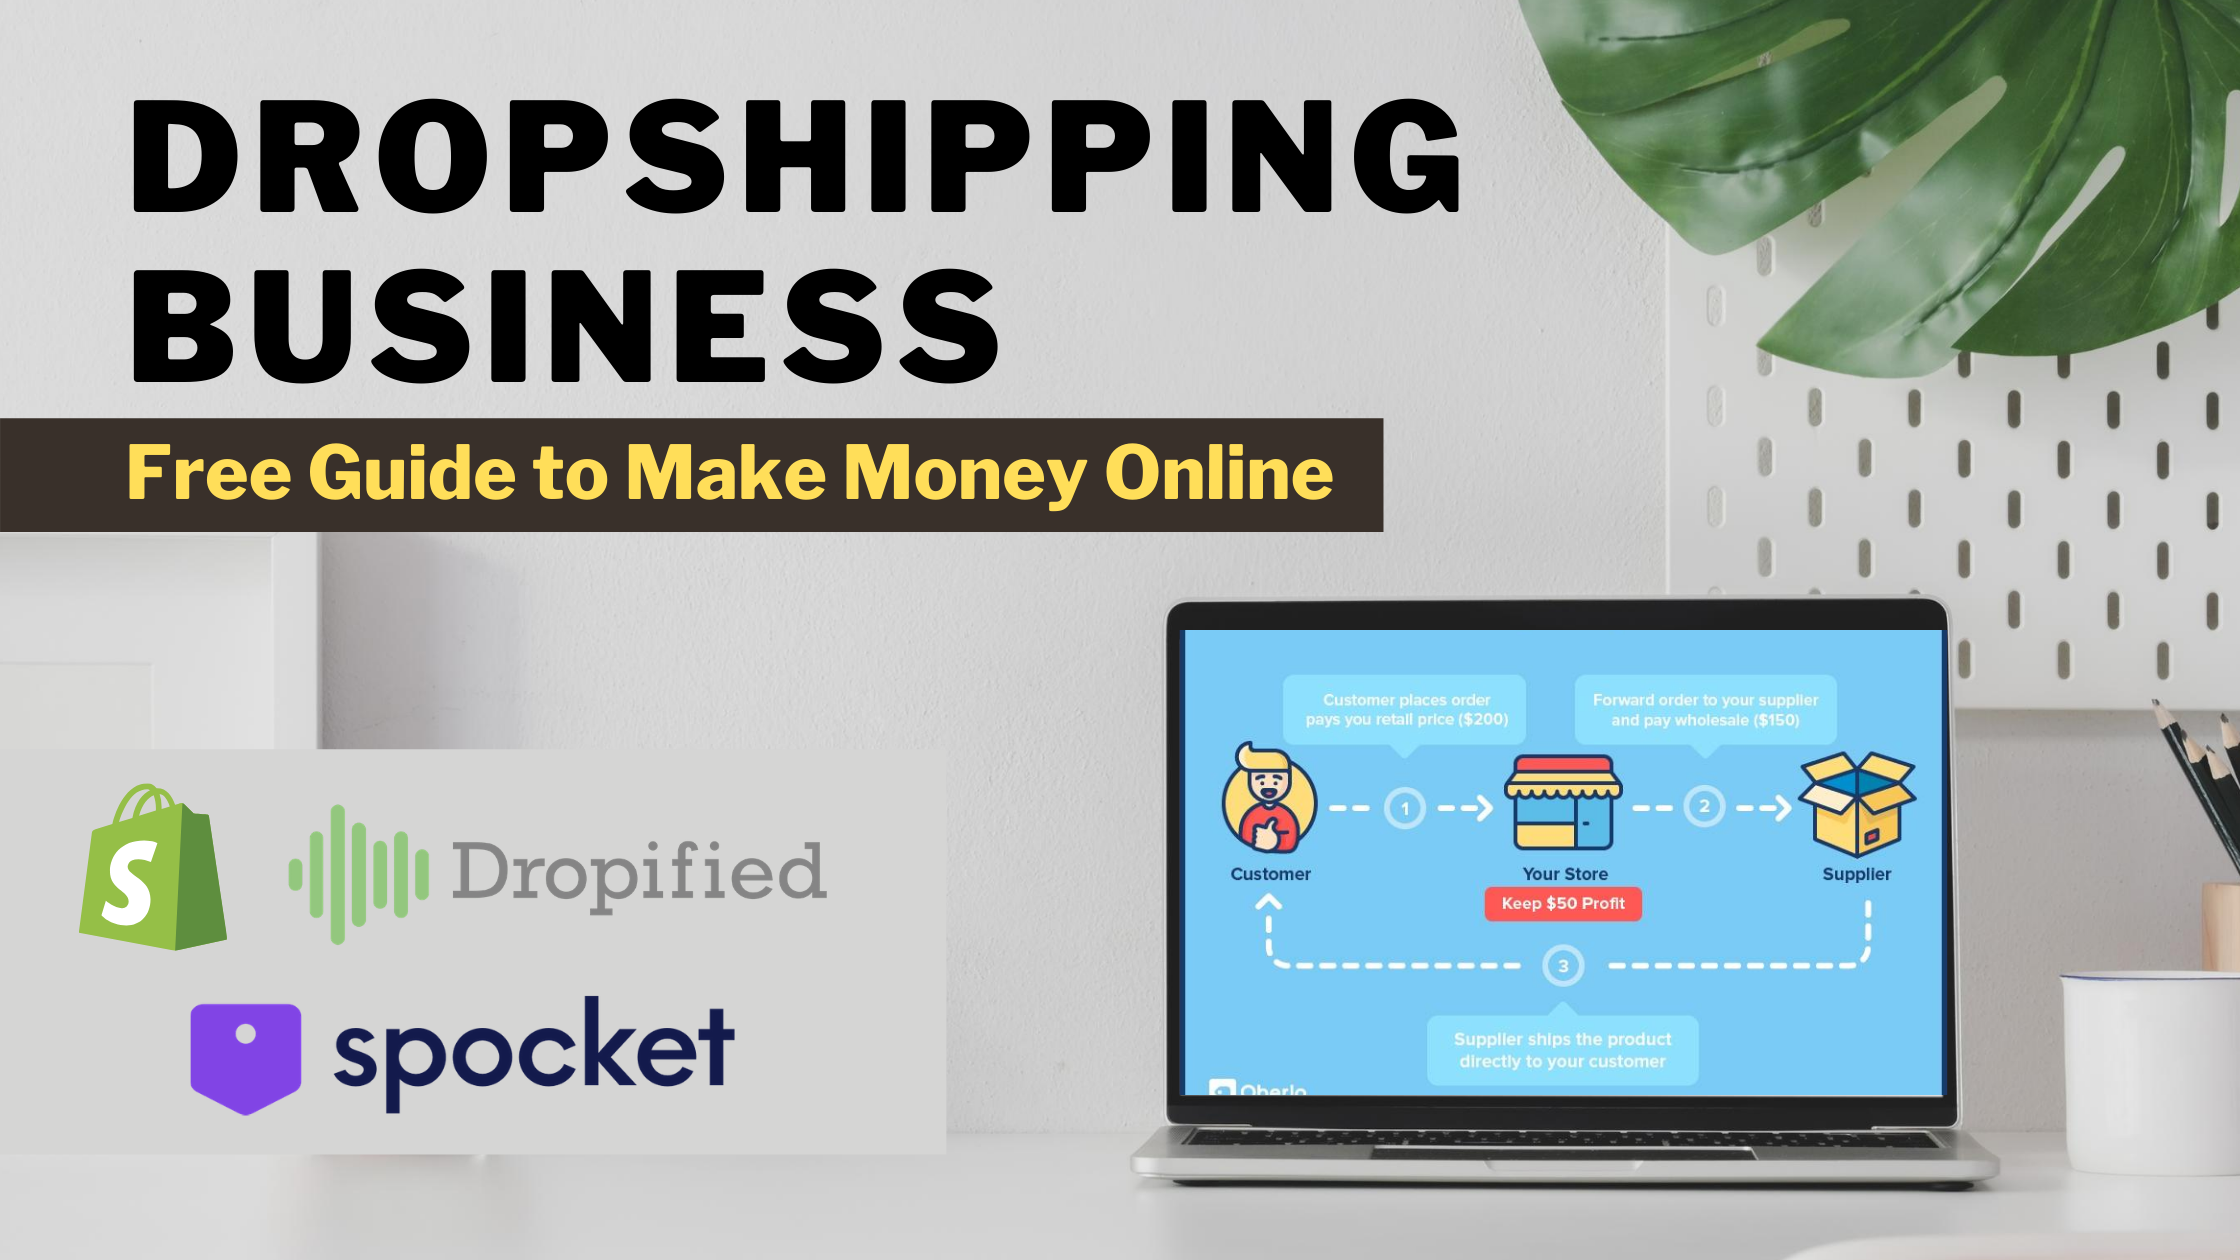 Dropshipping business - make money online